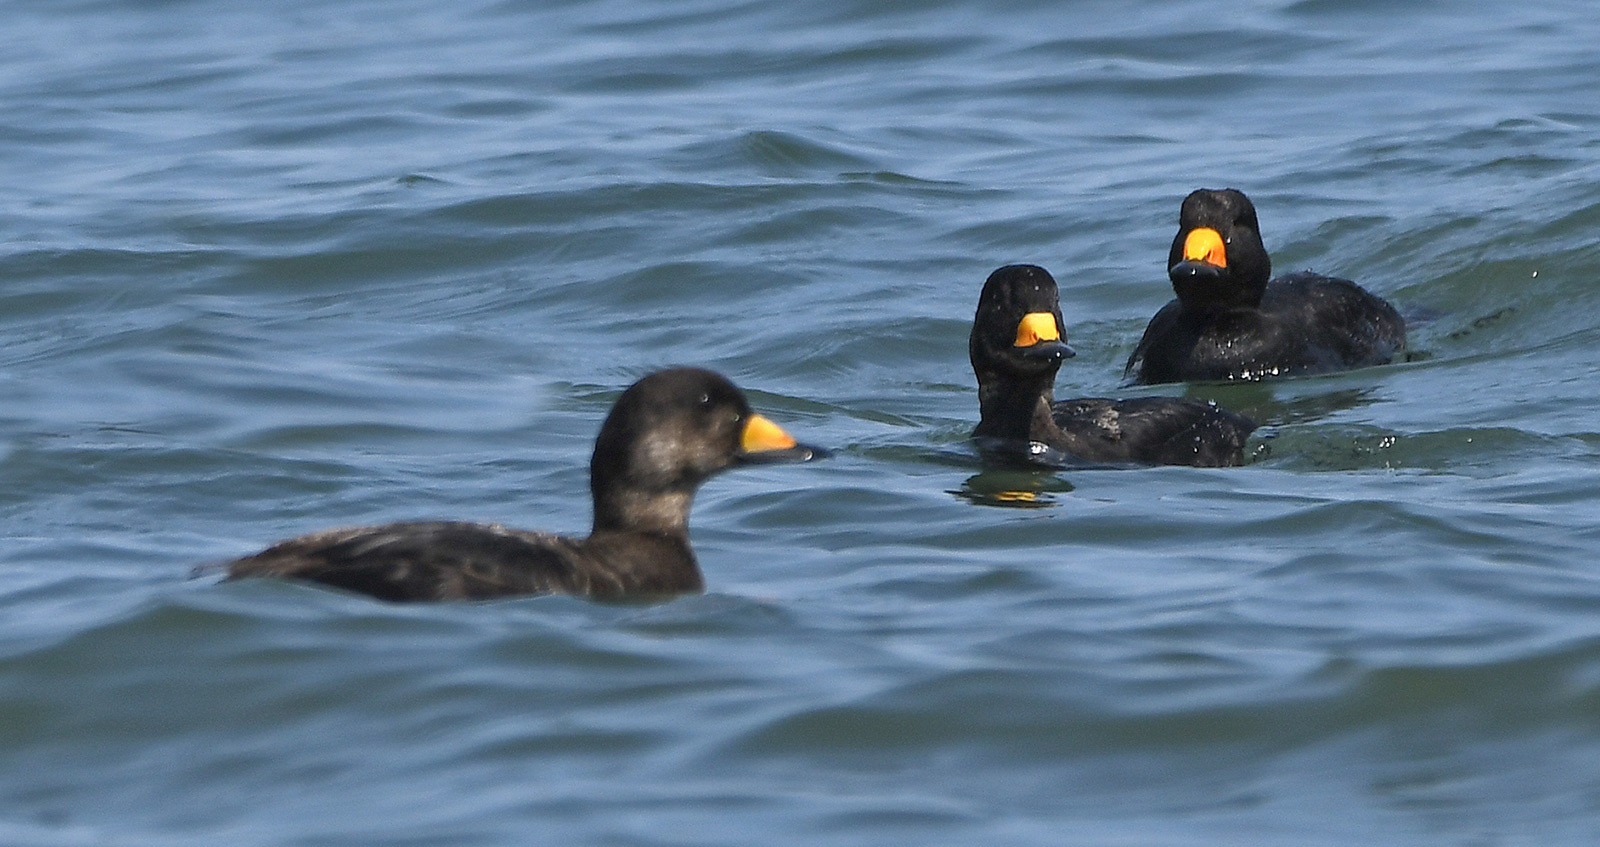 Three black scoters in the water.